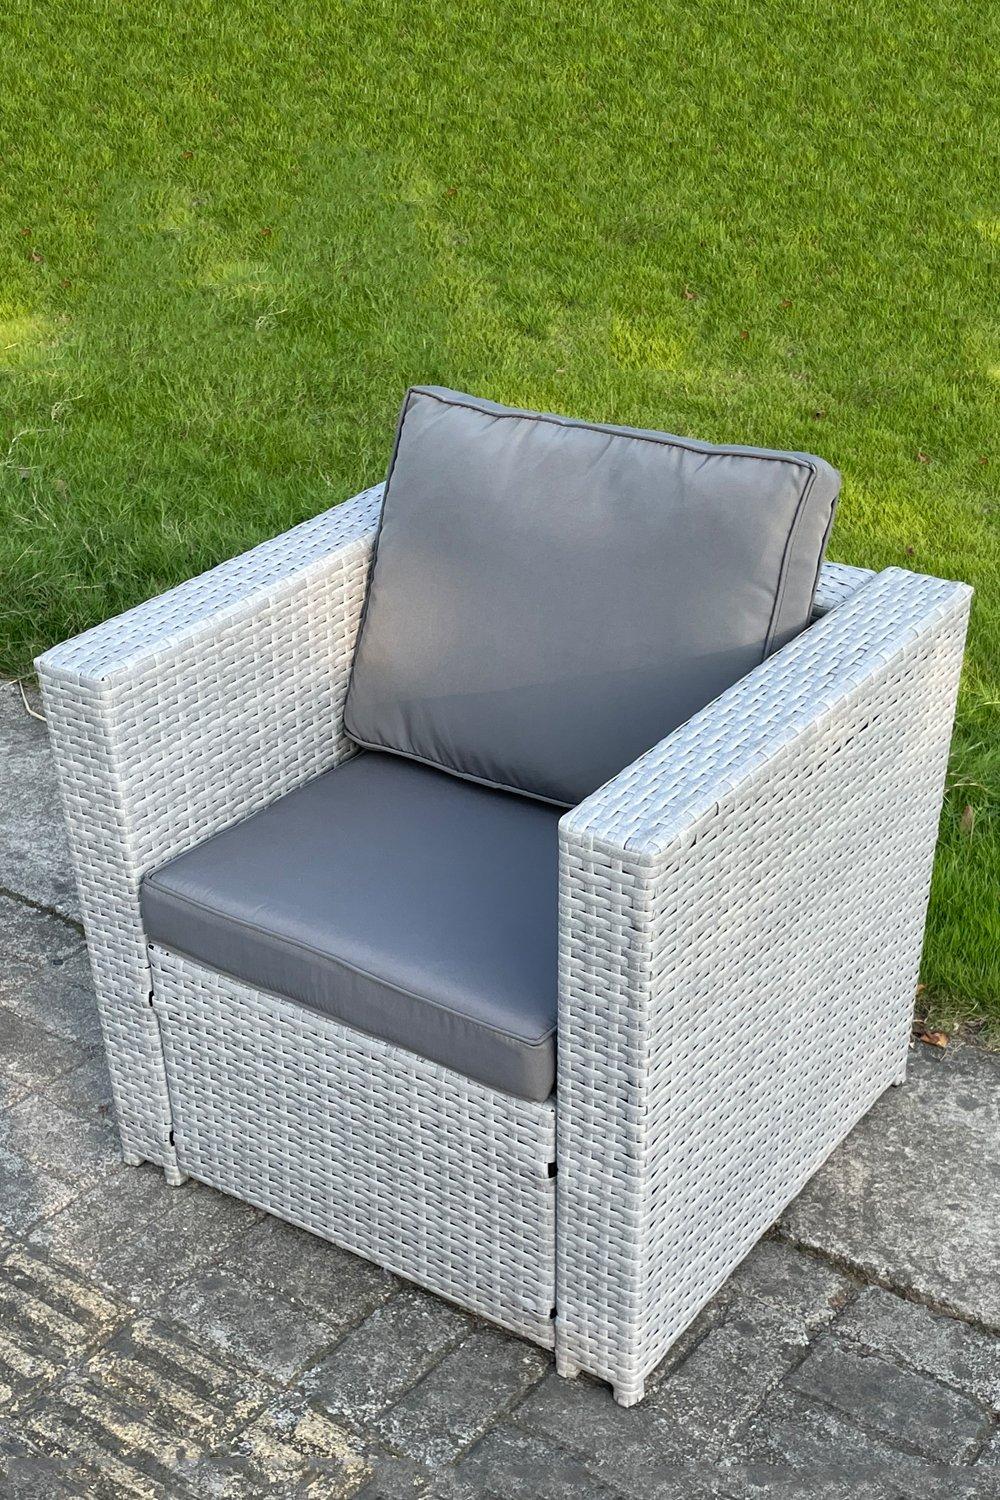 Rattan Single Chair Patio Garden Furniture With Thick Cushion Light Grey